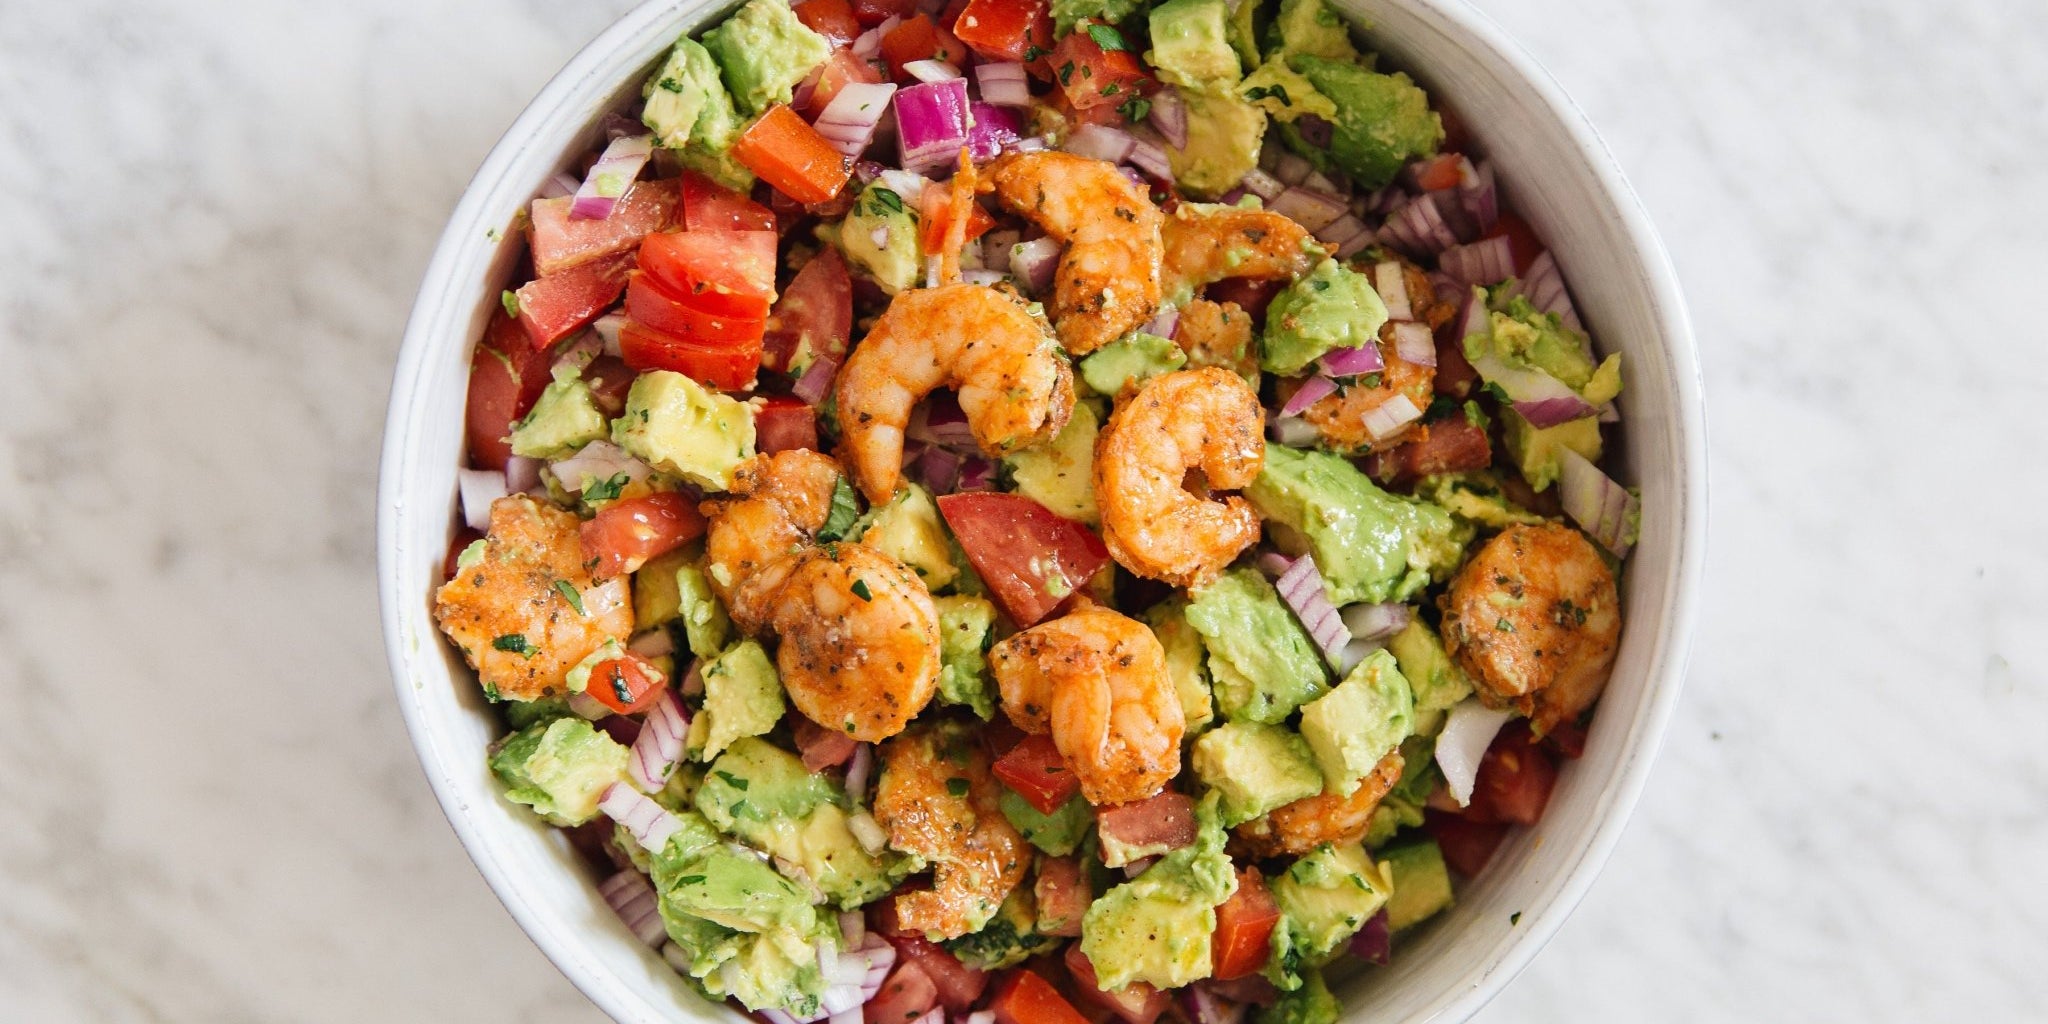 Prime Shrimp Signature Seasoned in white bowl with avocado, red peppers, and red onion. On marble counter. 